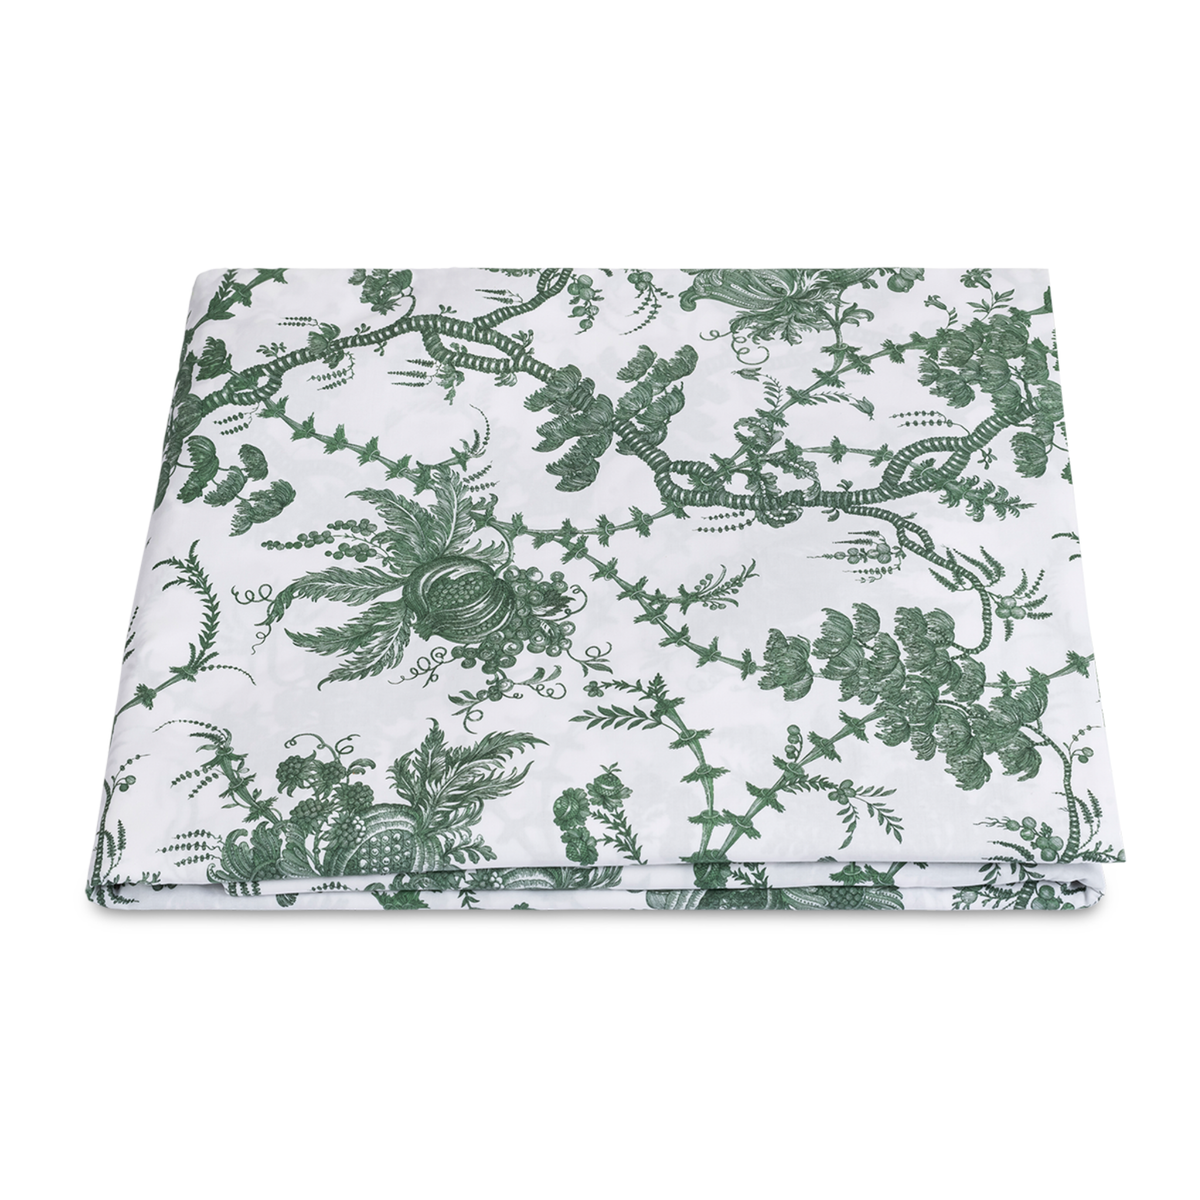 Folded Fitted Sheet of Matouk Schumacher San Cristobal Bedding in Green Color